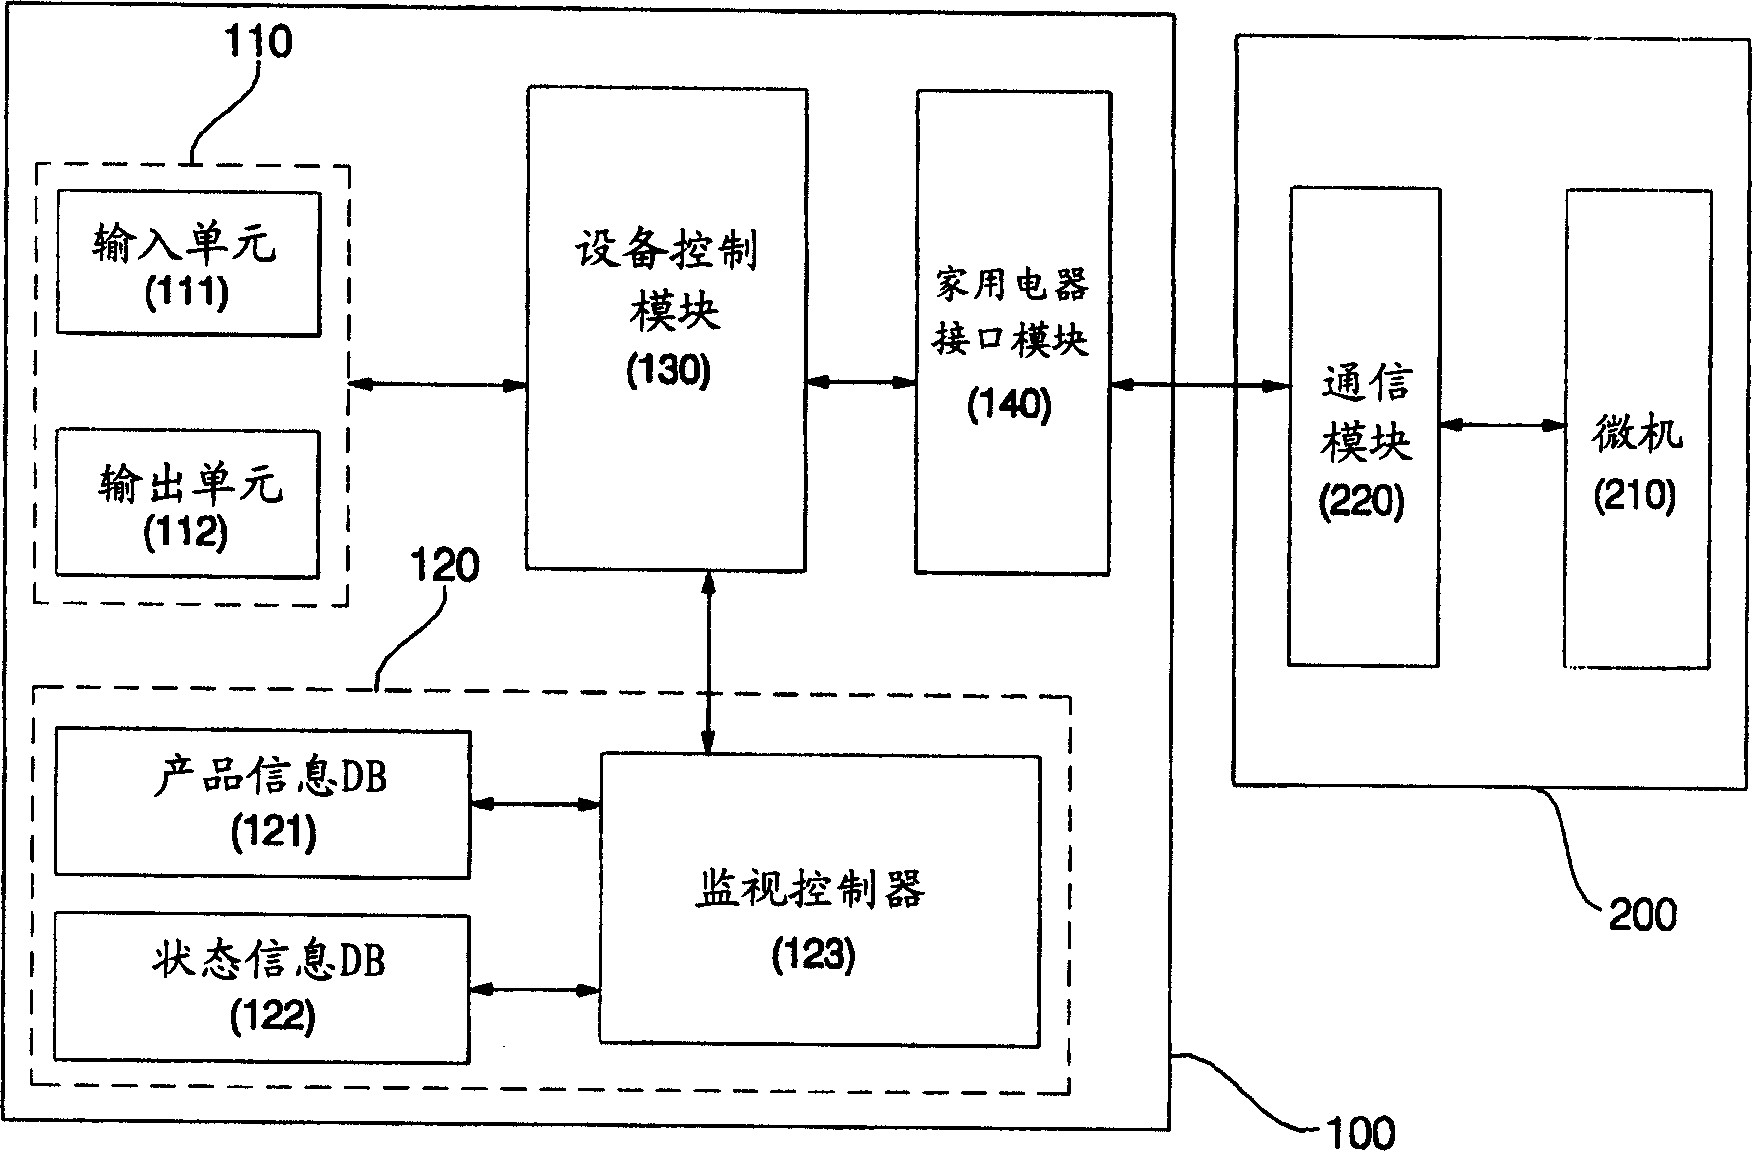 Home appliance network system and method for operating the same